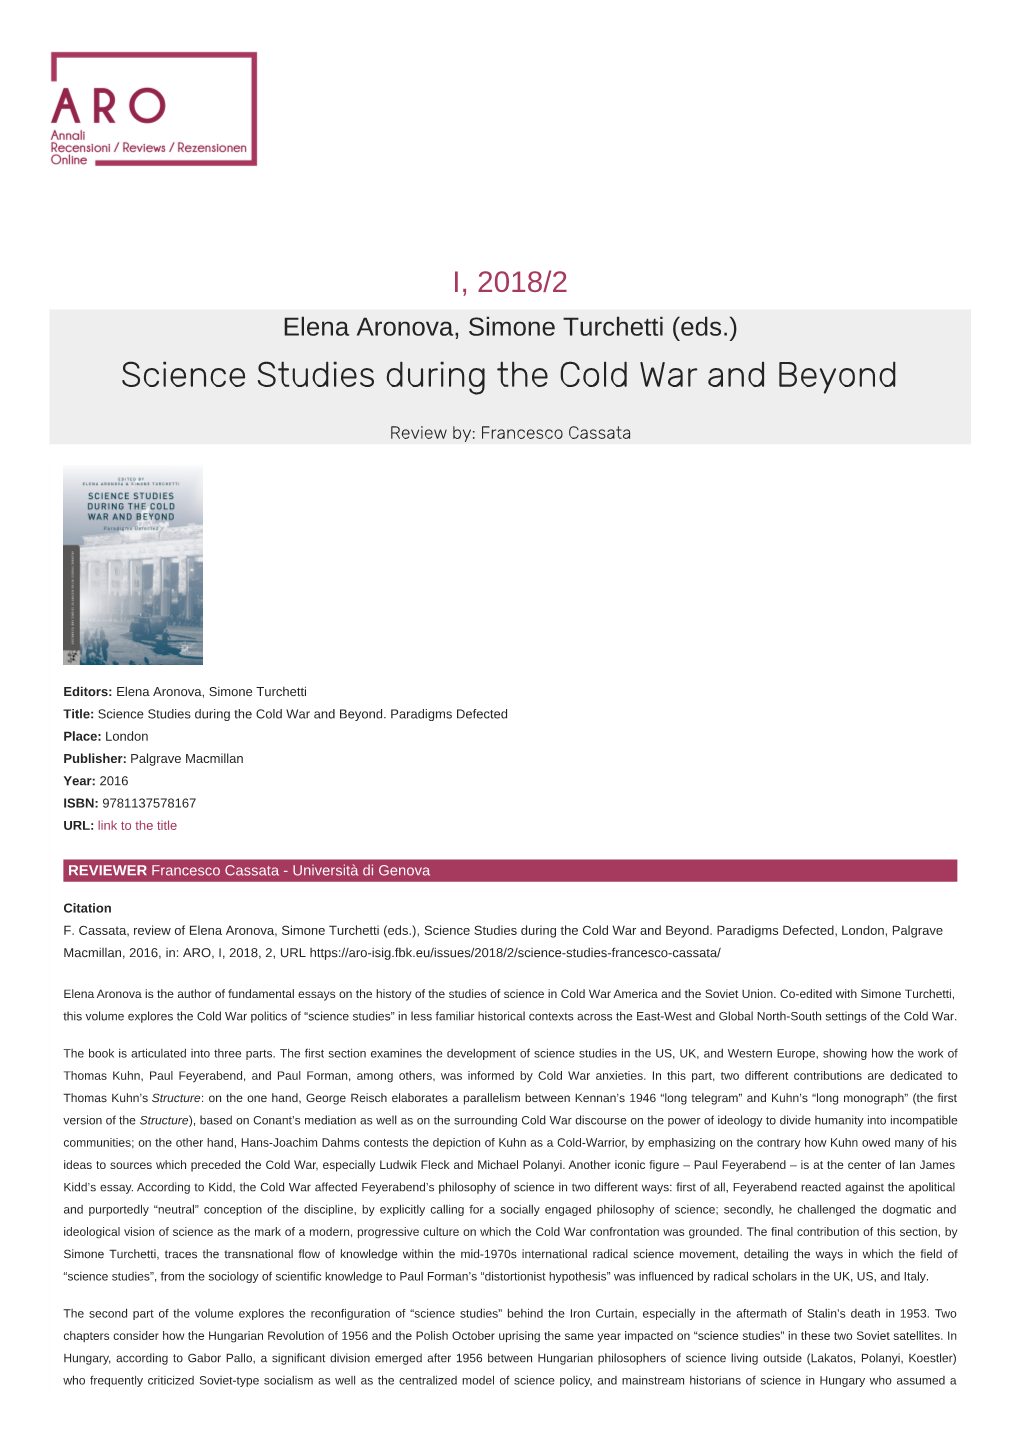 Science Studies During the Cold War and Beyond